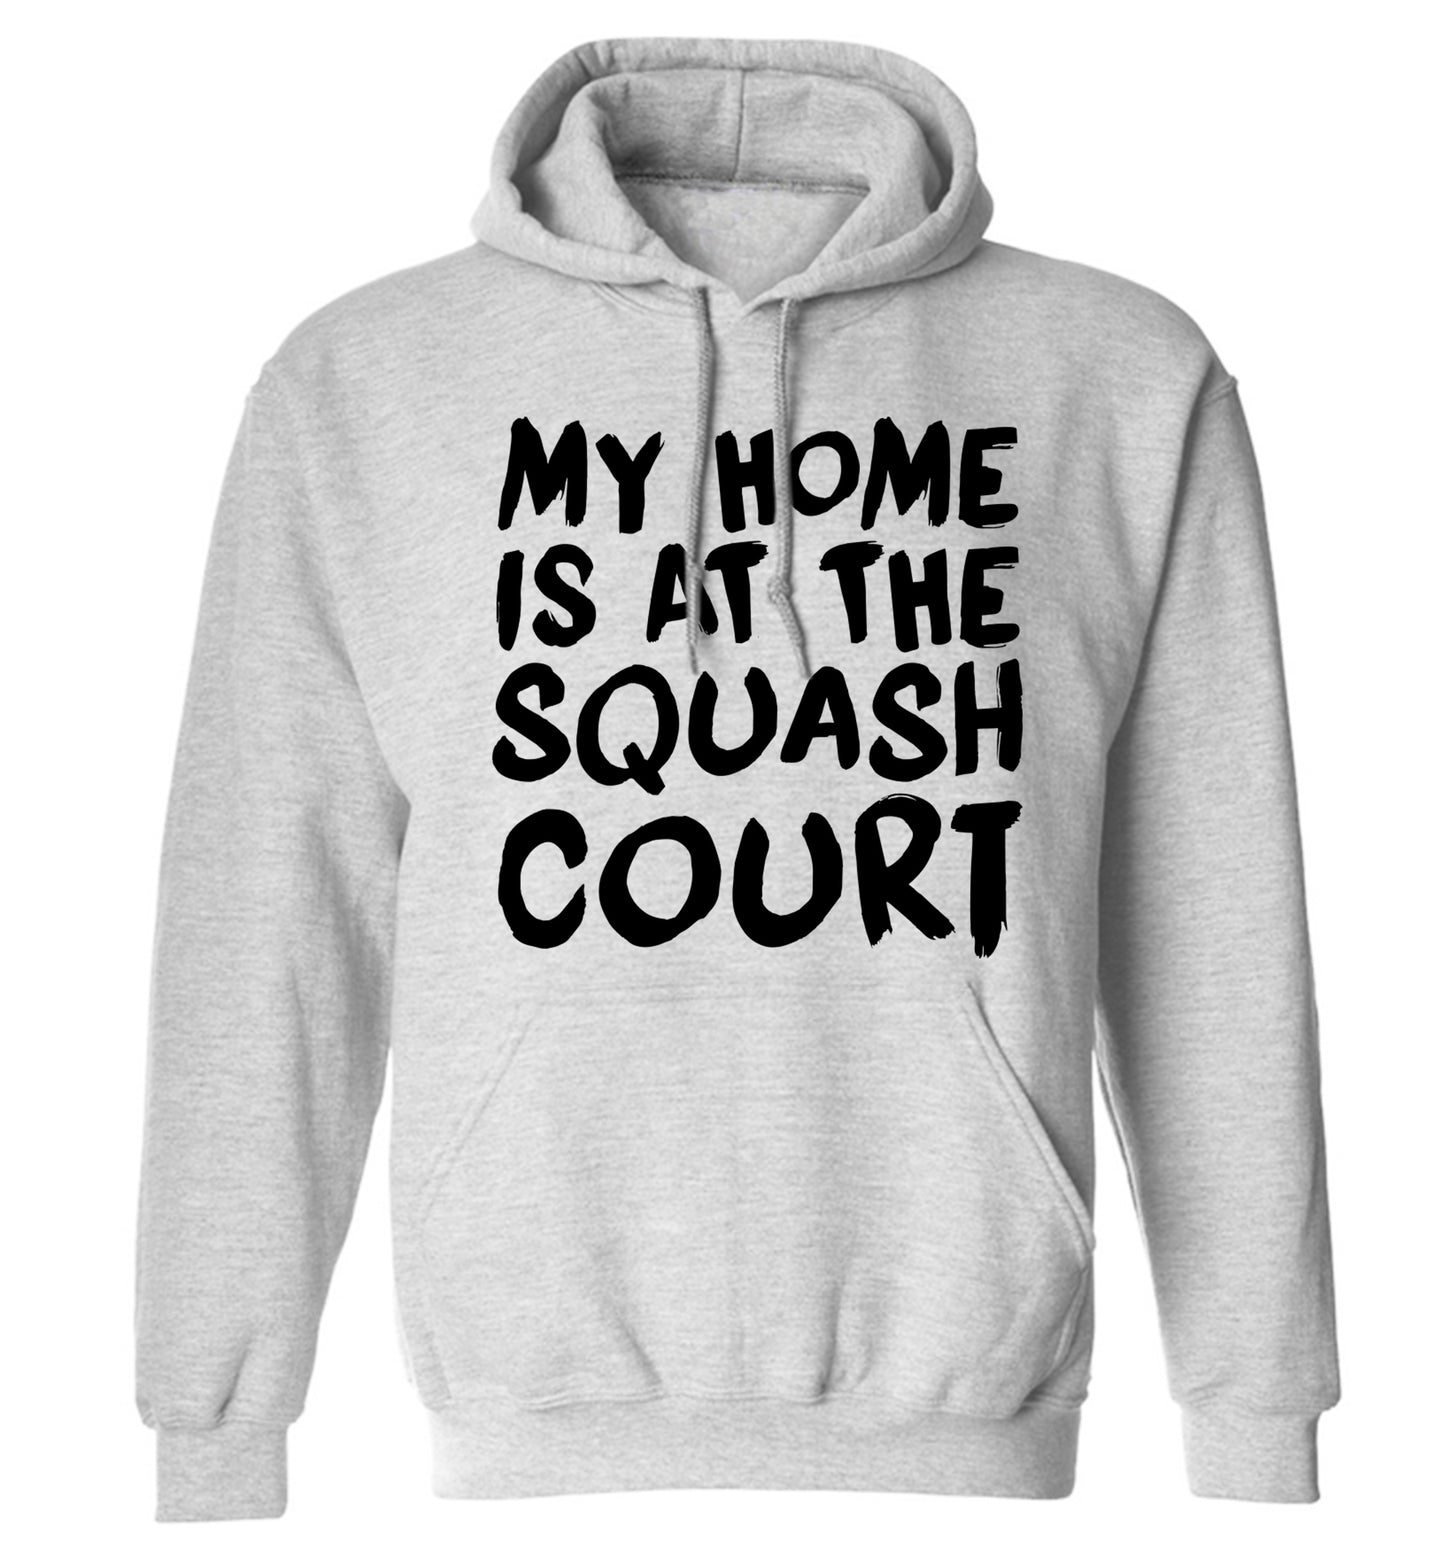 My home is at the squash court adults unisex grey hoodie 2XL